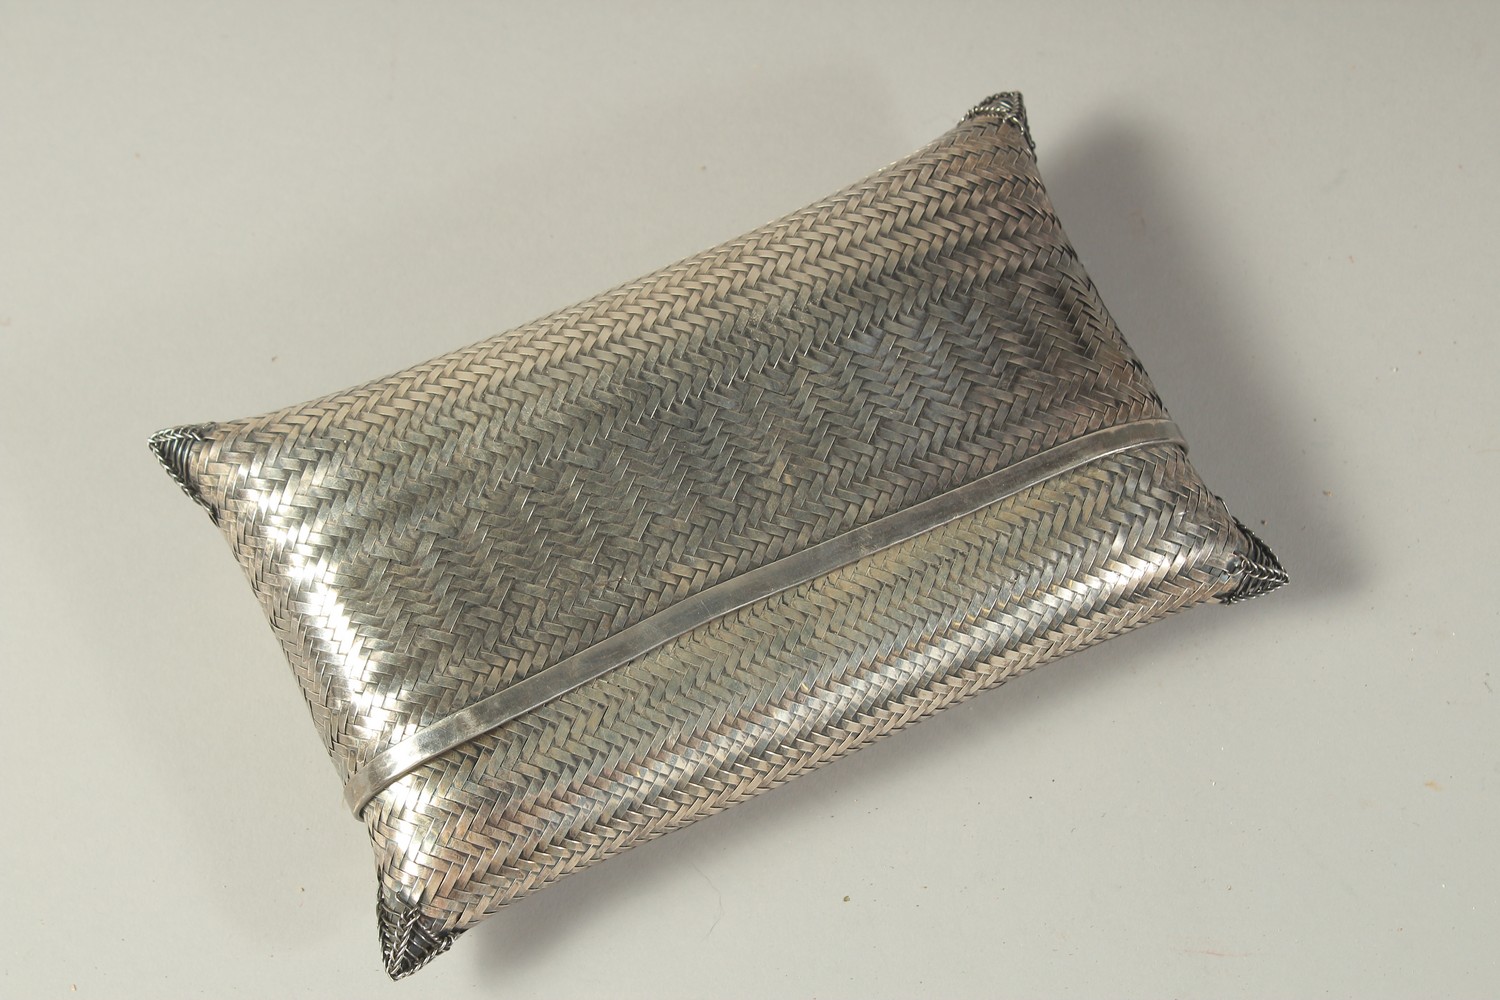 A FINE EARLY 20TH CENTURY BURMESE OR THAI WOVEN SOLID SILVER PURSE, 17.5cm wide. - Image 2 of 3